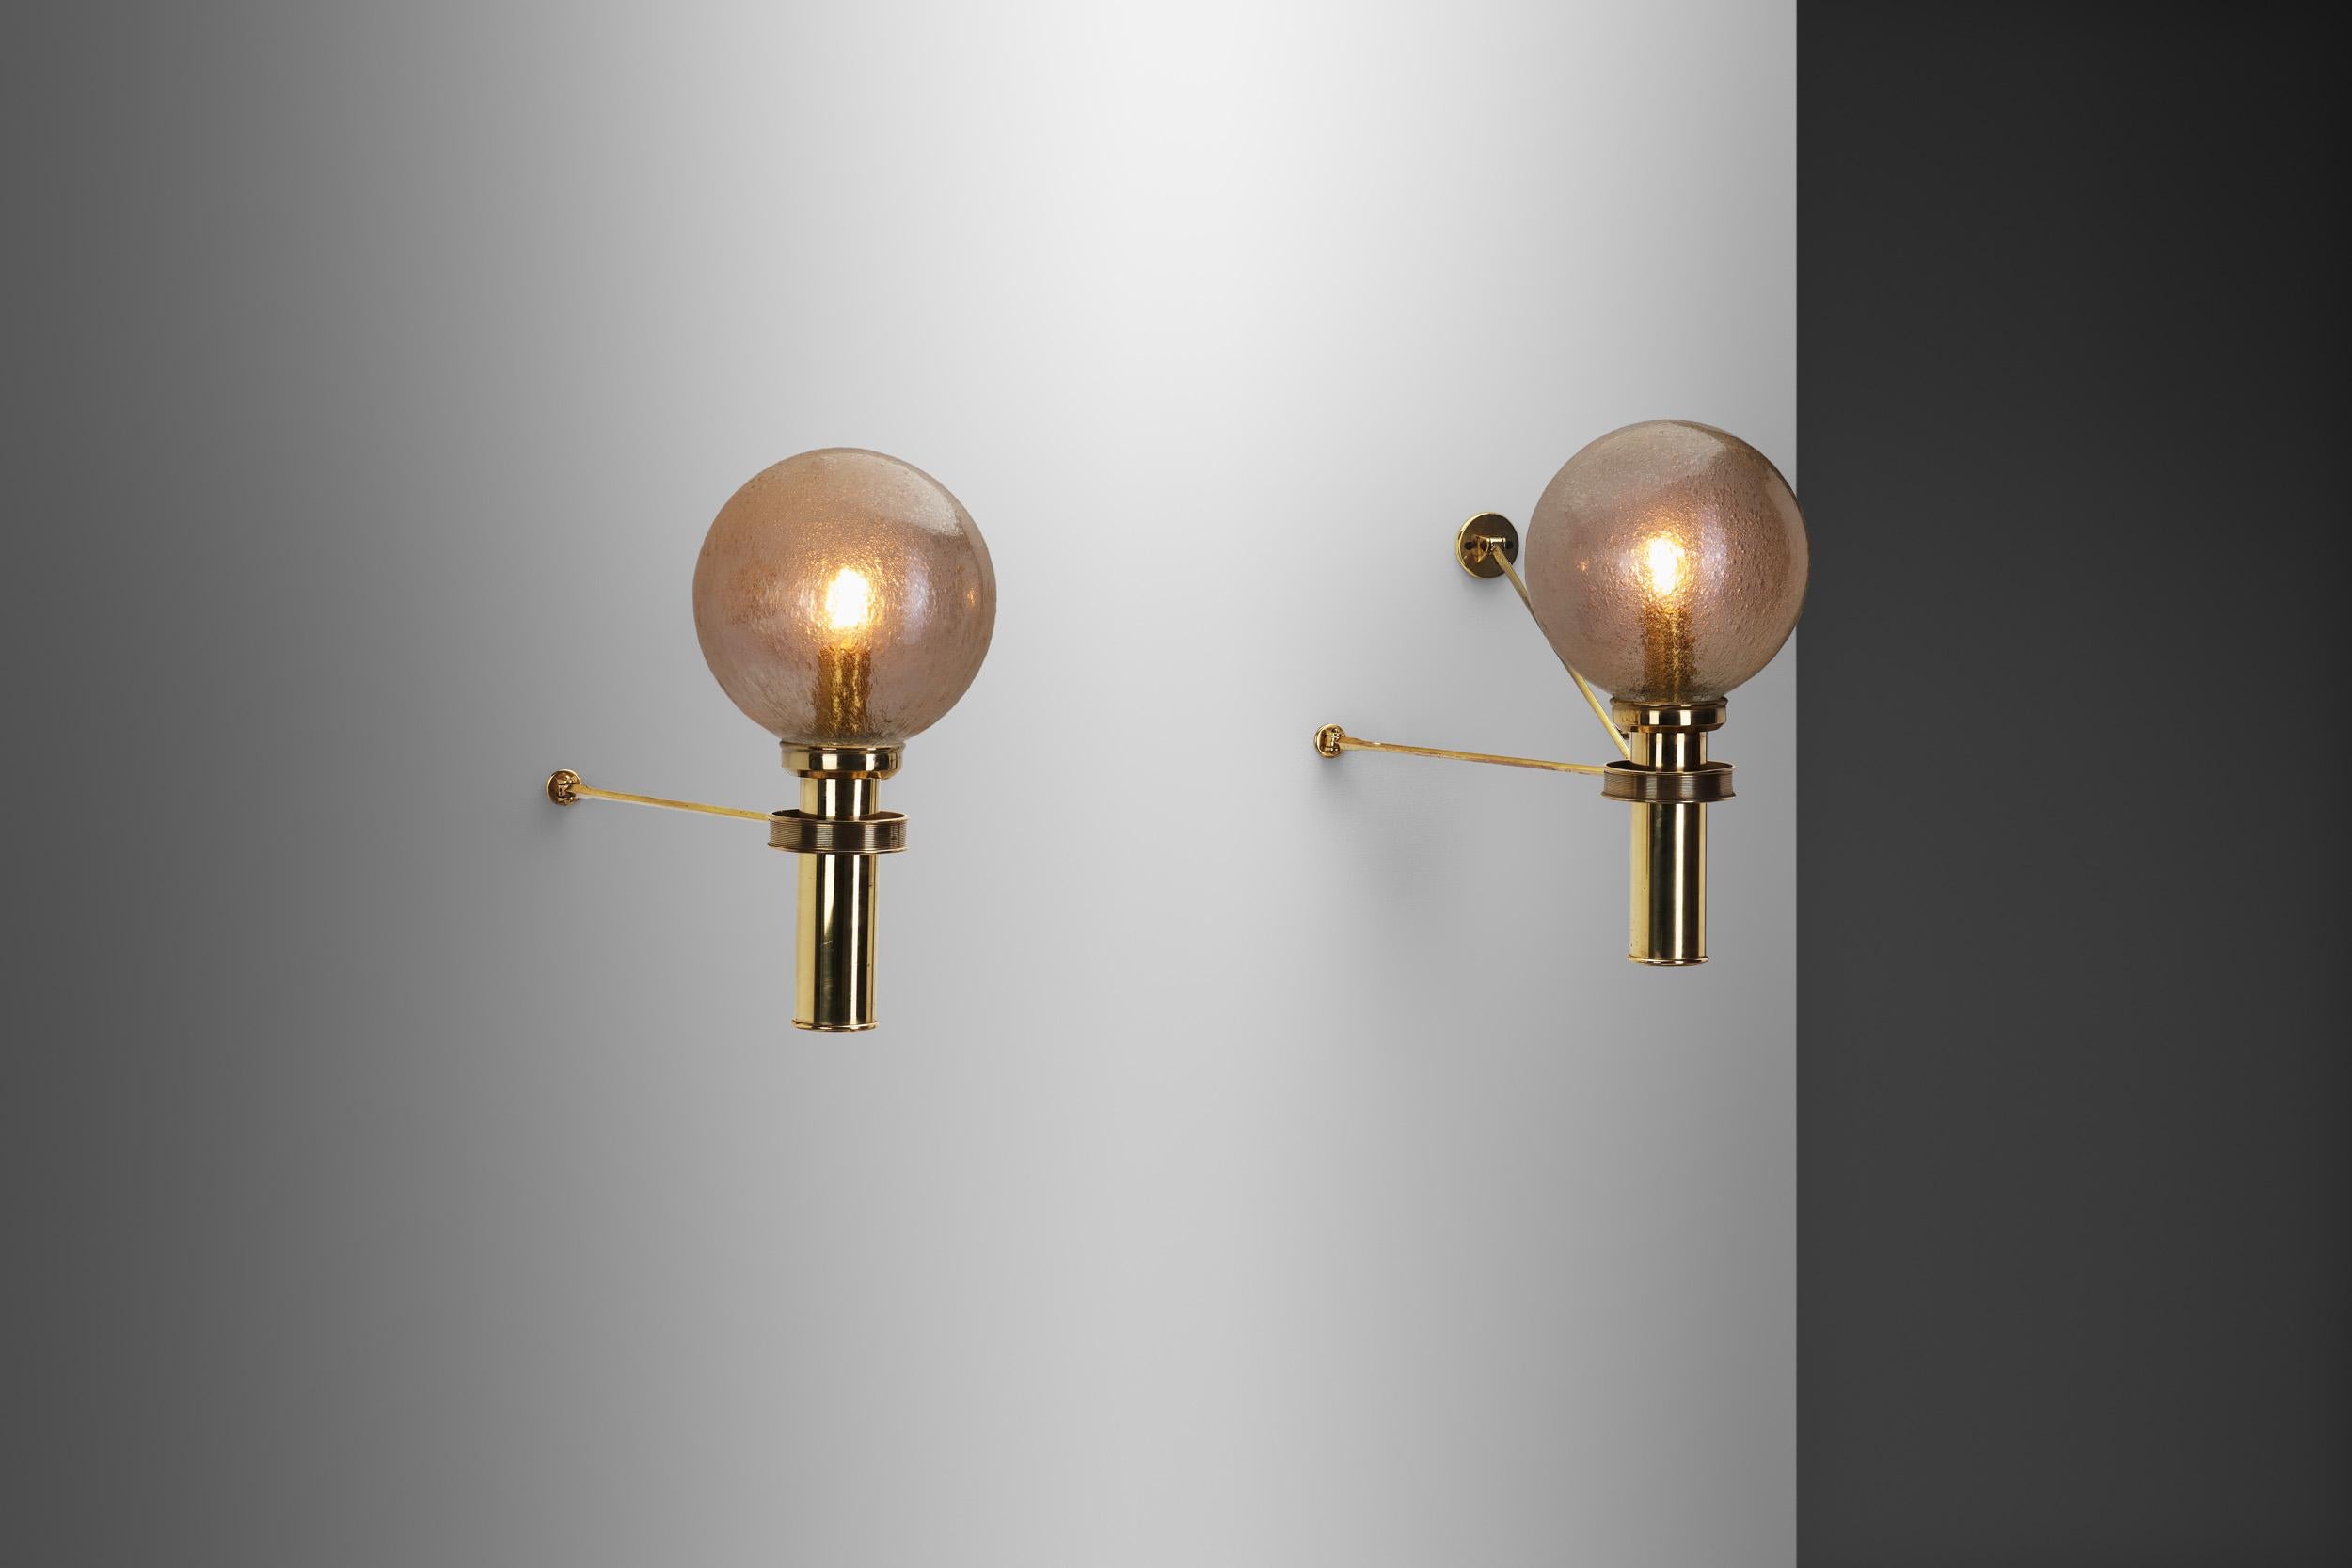 Mid-Century Modern Large European Modern Wall Sconces in Brass & Bubble Glass, Europe, circa 1950s For Sale